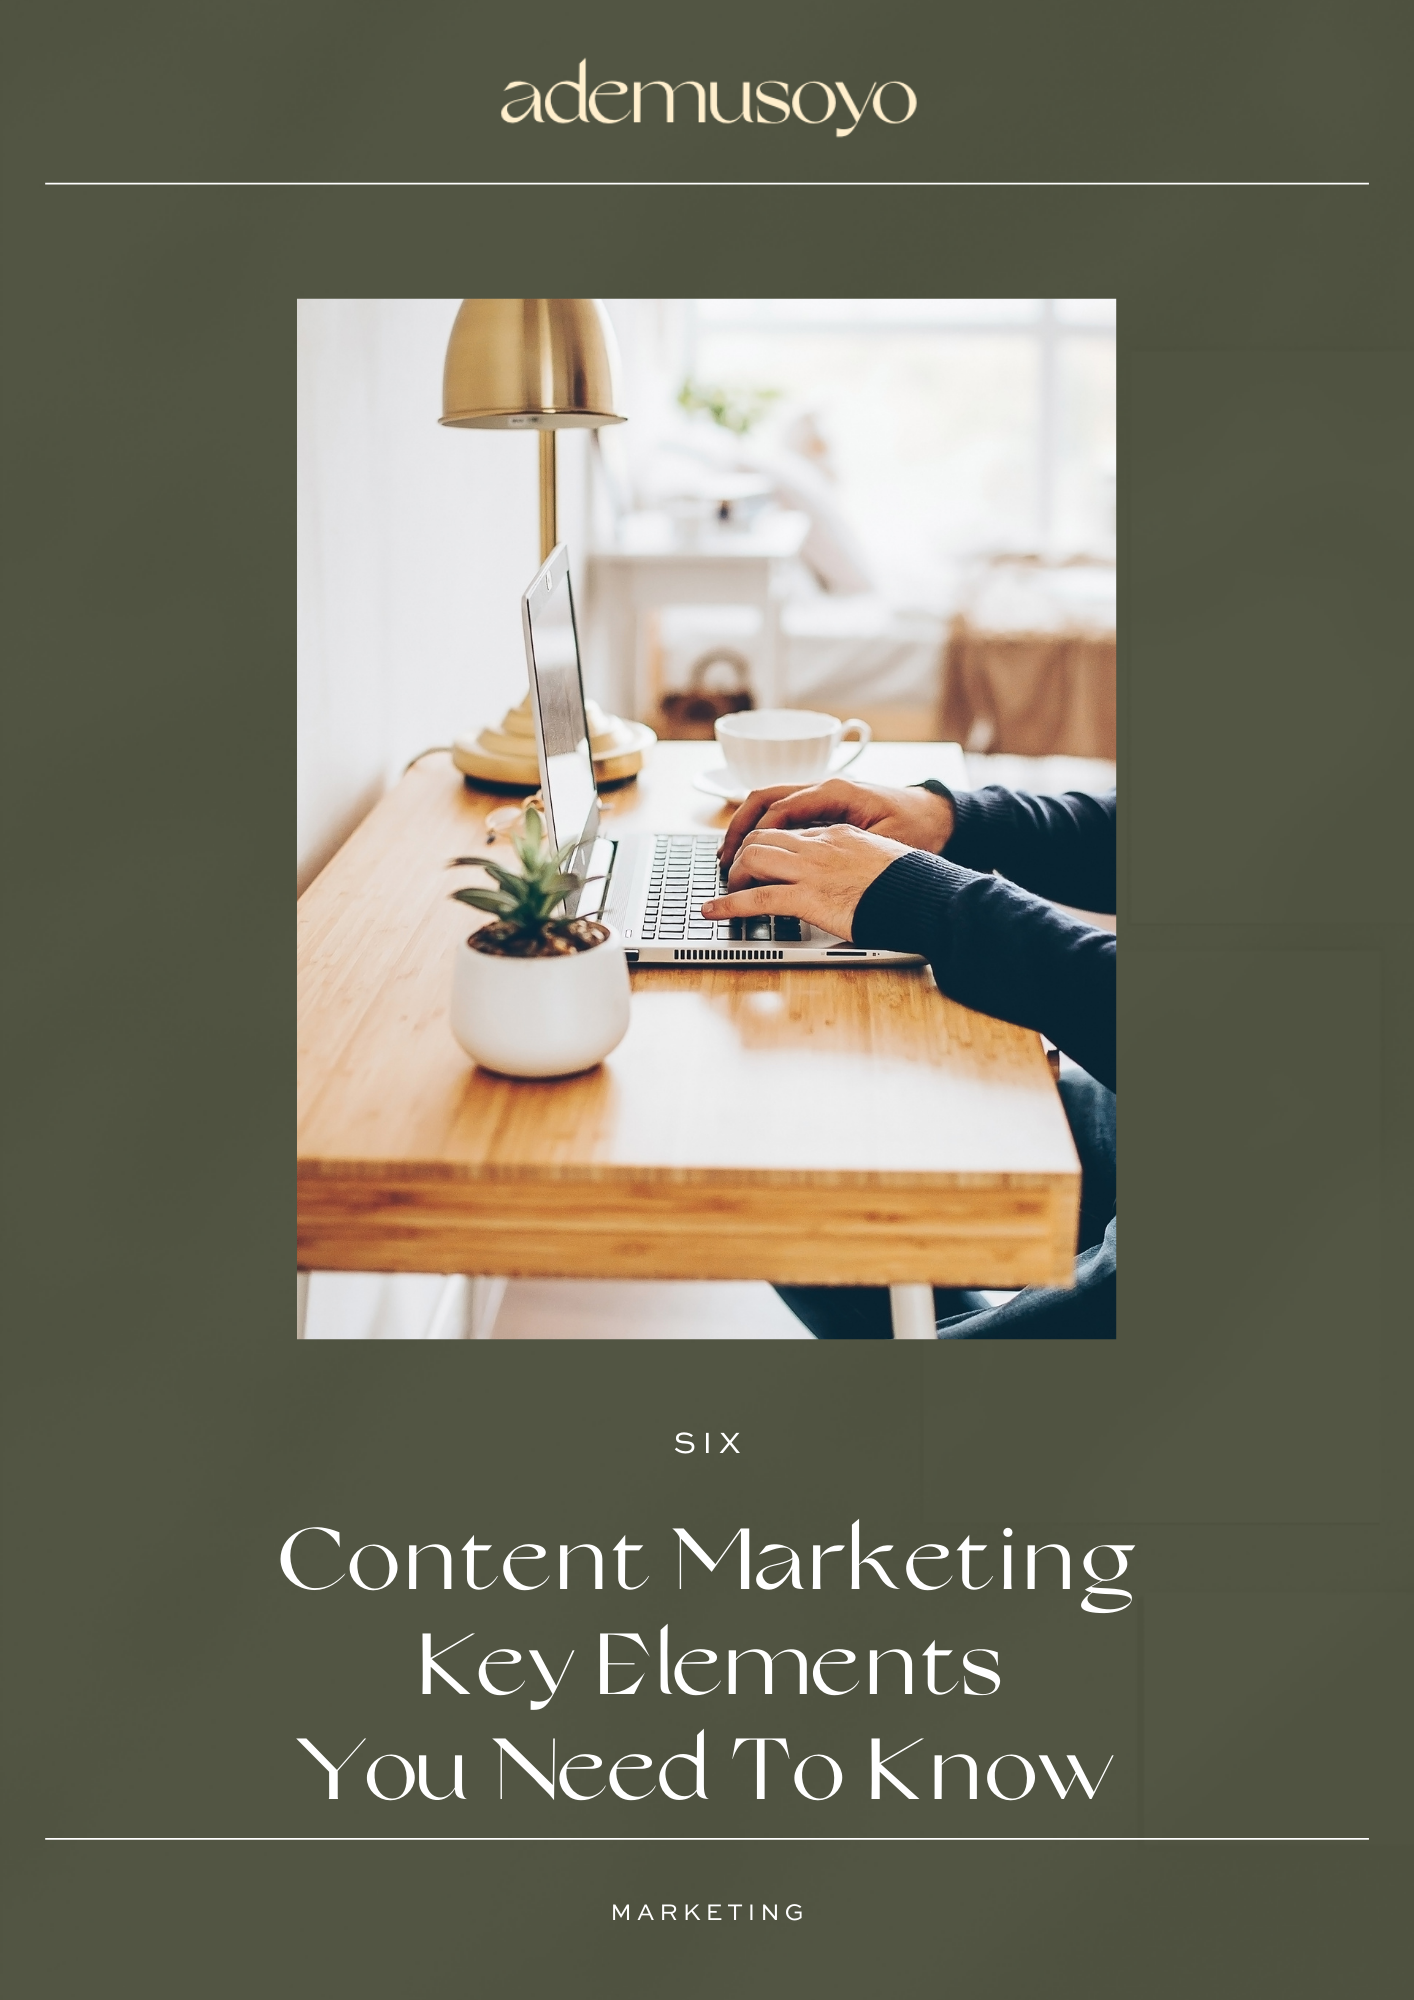 Six Content Marketing Key Elements You Need To Know